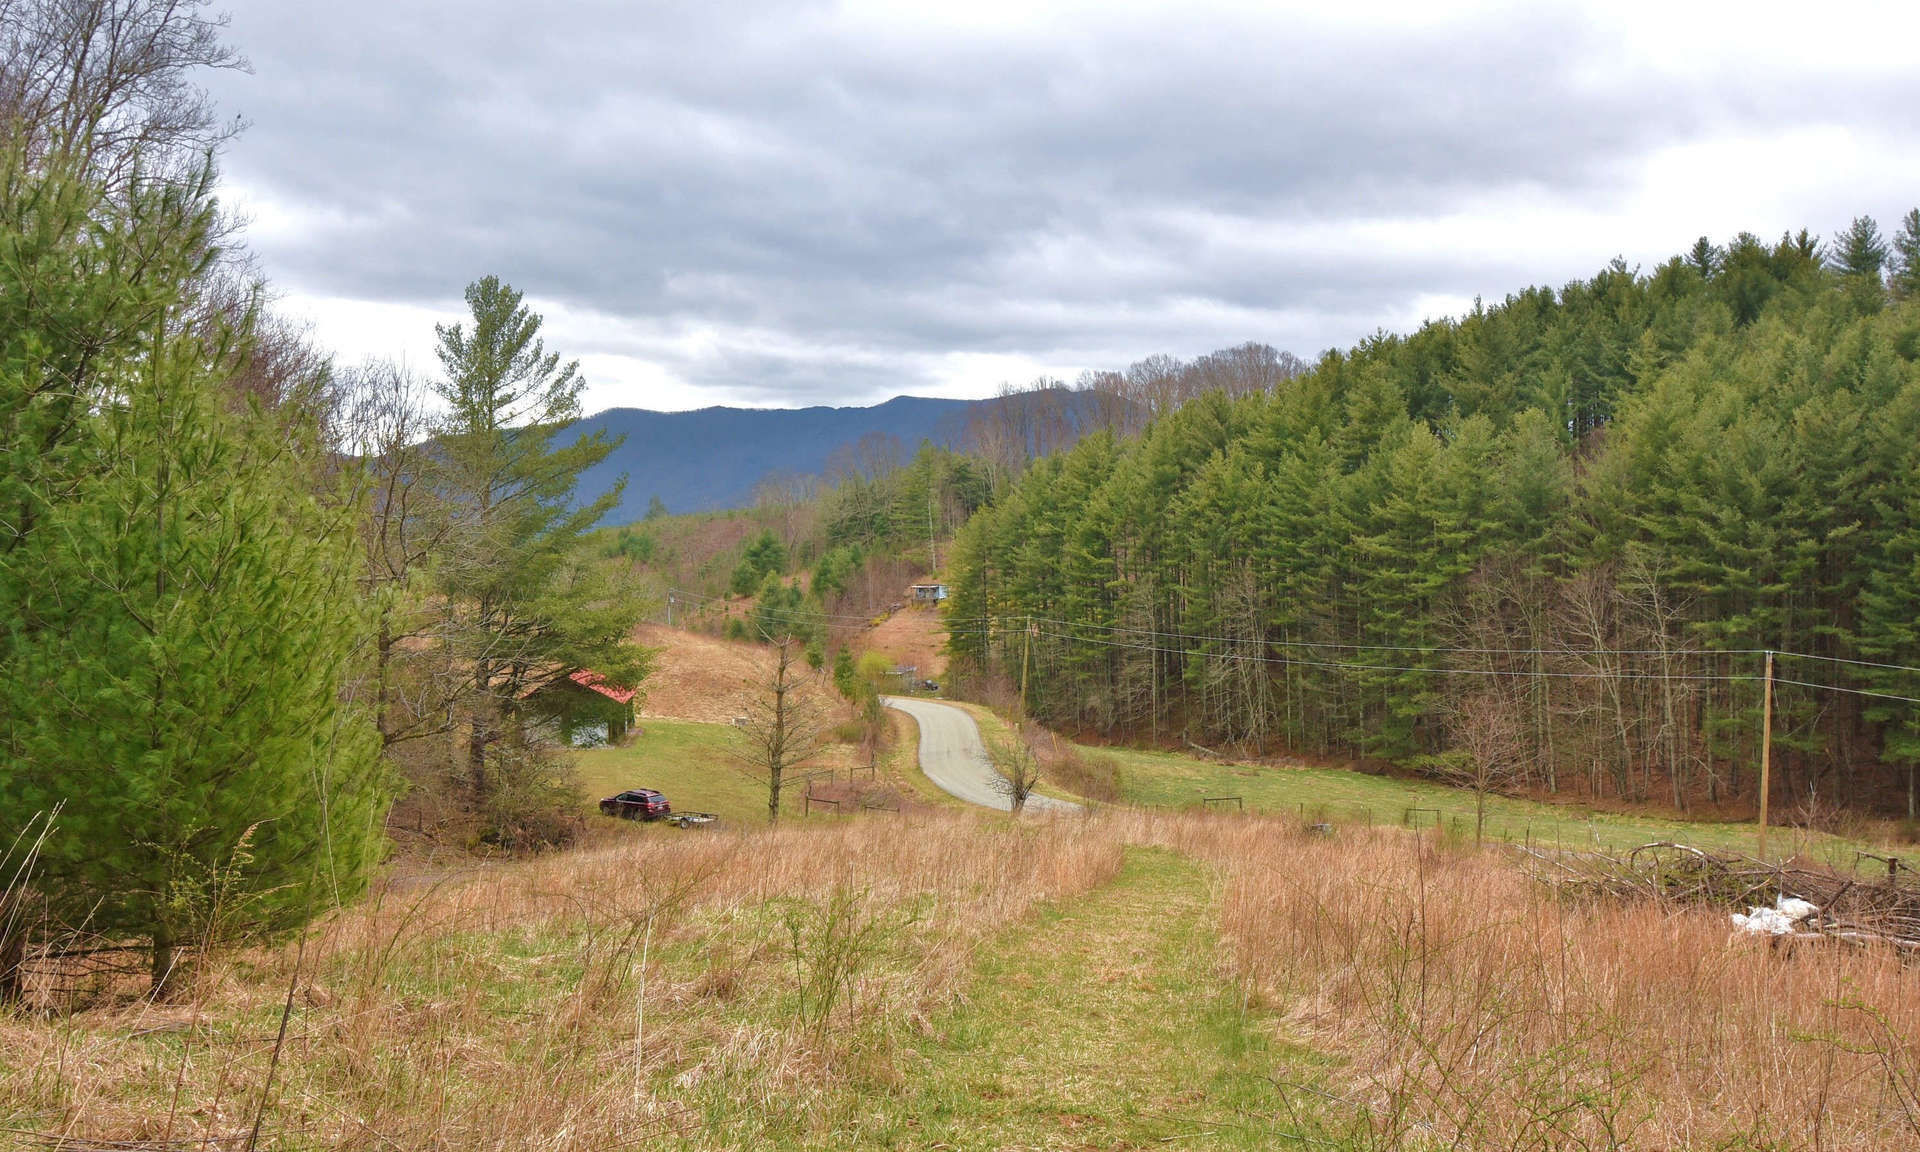 If you are looking for a large acreage tract in the NC Mountains, come take a look at this beautiful 107.58 acre tract located off of Little Piney Road in the Lansing area of Ashe County in the NC High Country.